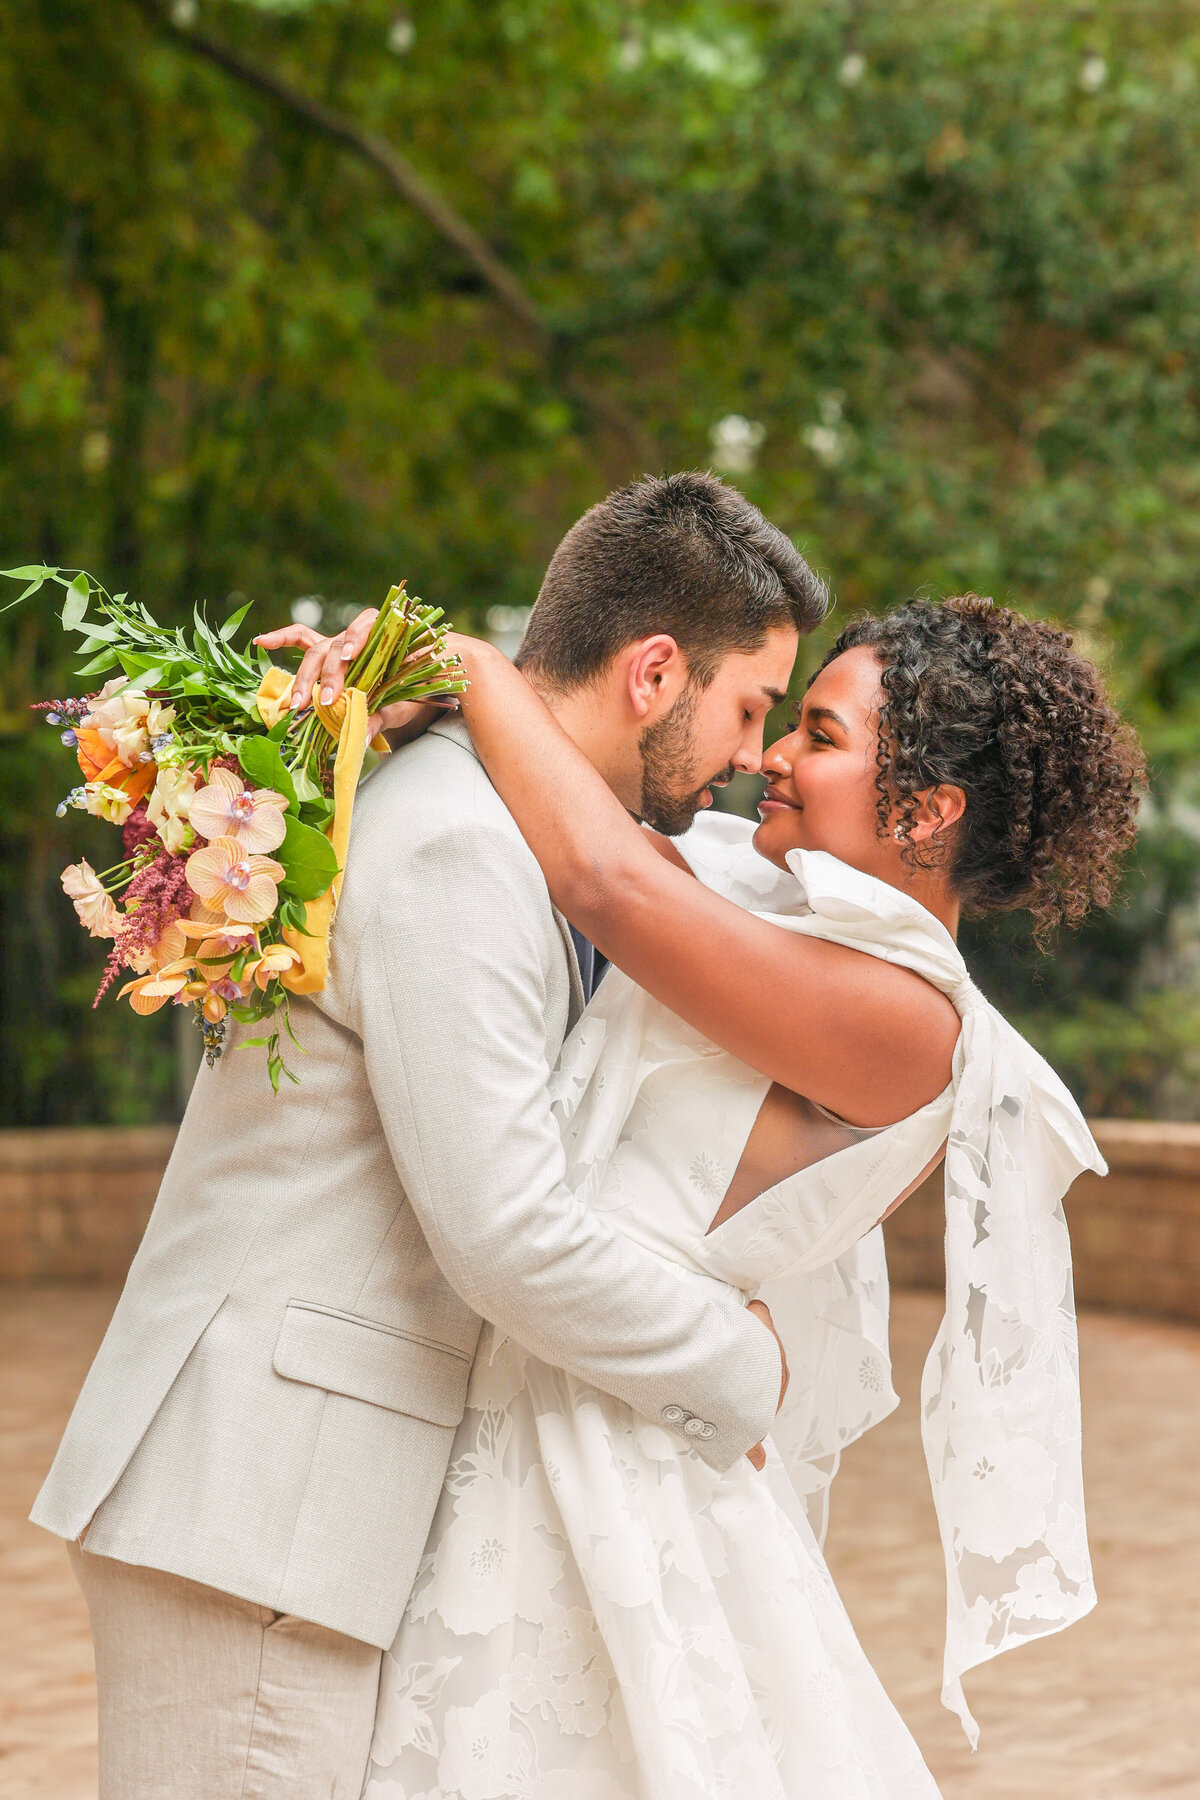 bride wearing white dress with bows on sleeves while holding colorful bouquet with arms around groom wearing tan suit